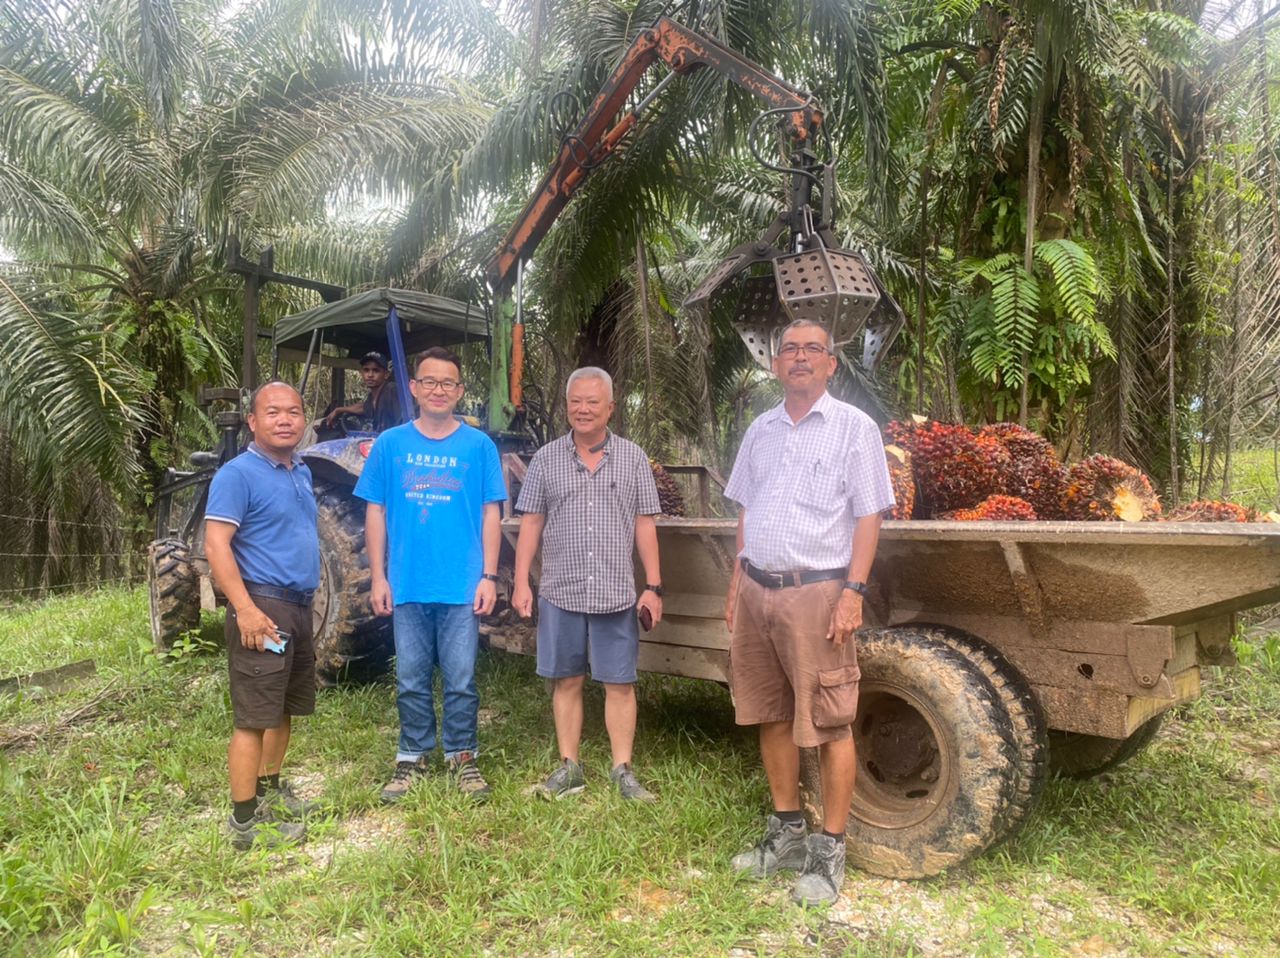 Moh (second left) poses for a group photo together with Malaysia Estate Owners’ Association (MEOA) president Jeffery Ong (second right) and others during a recent visit to an oil palm plantation in Lundu